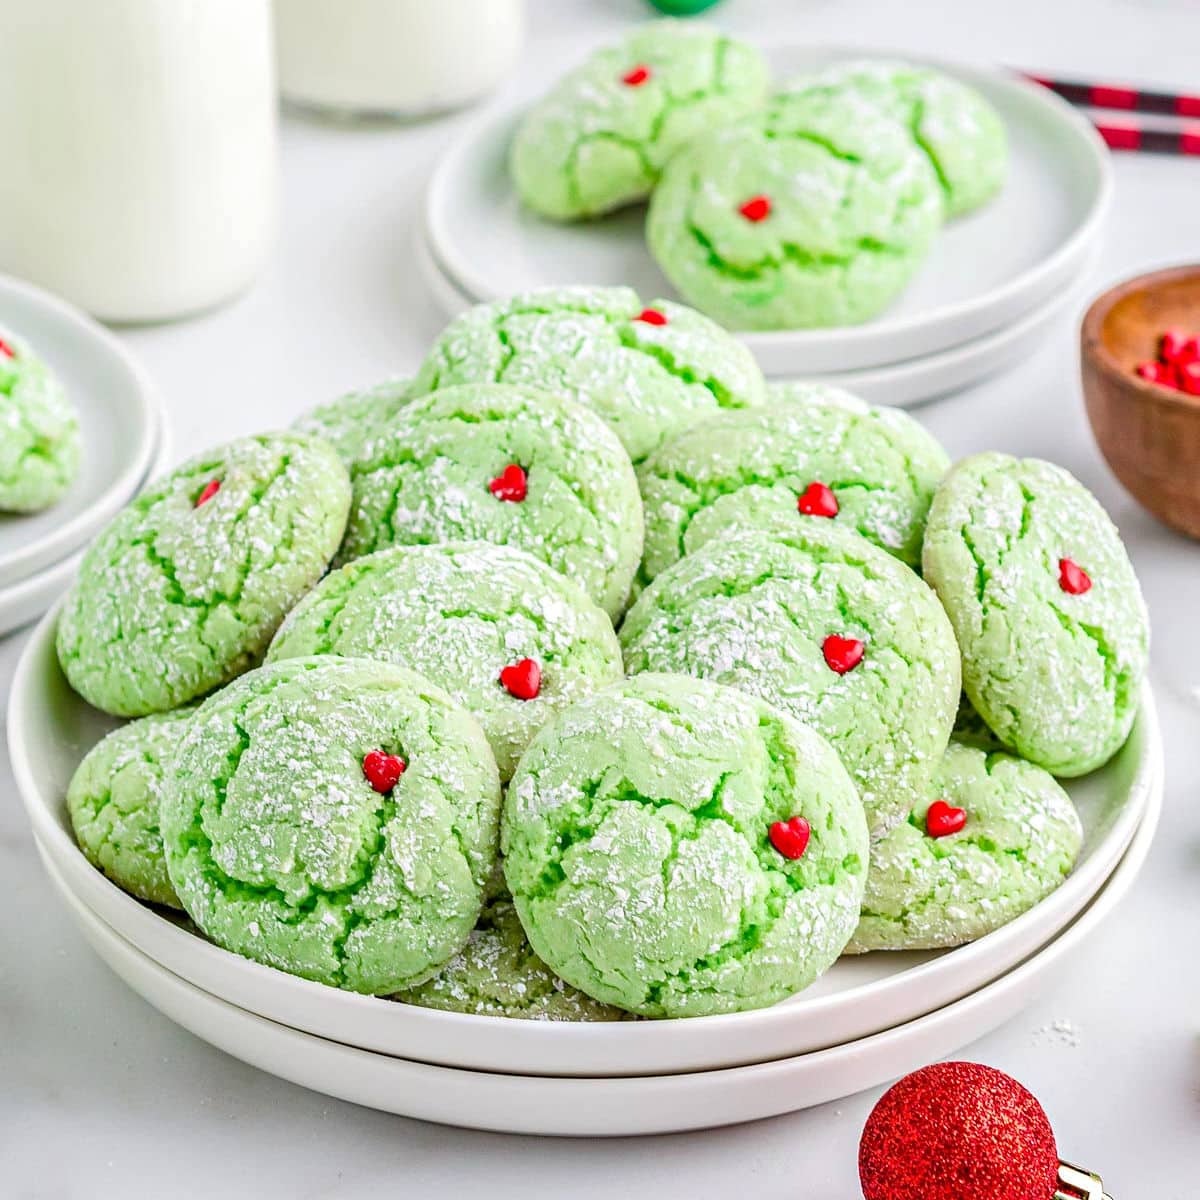 https://www.momontimeout.com/wp-content/uploads/2021/12/grinch-cookies-square.jpeg